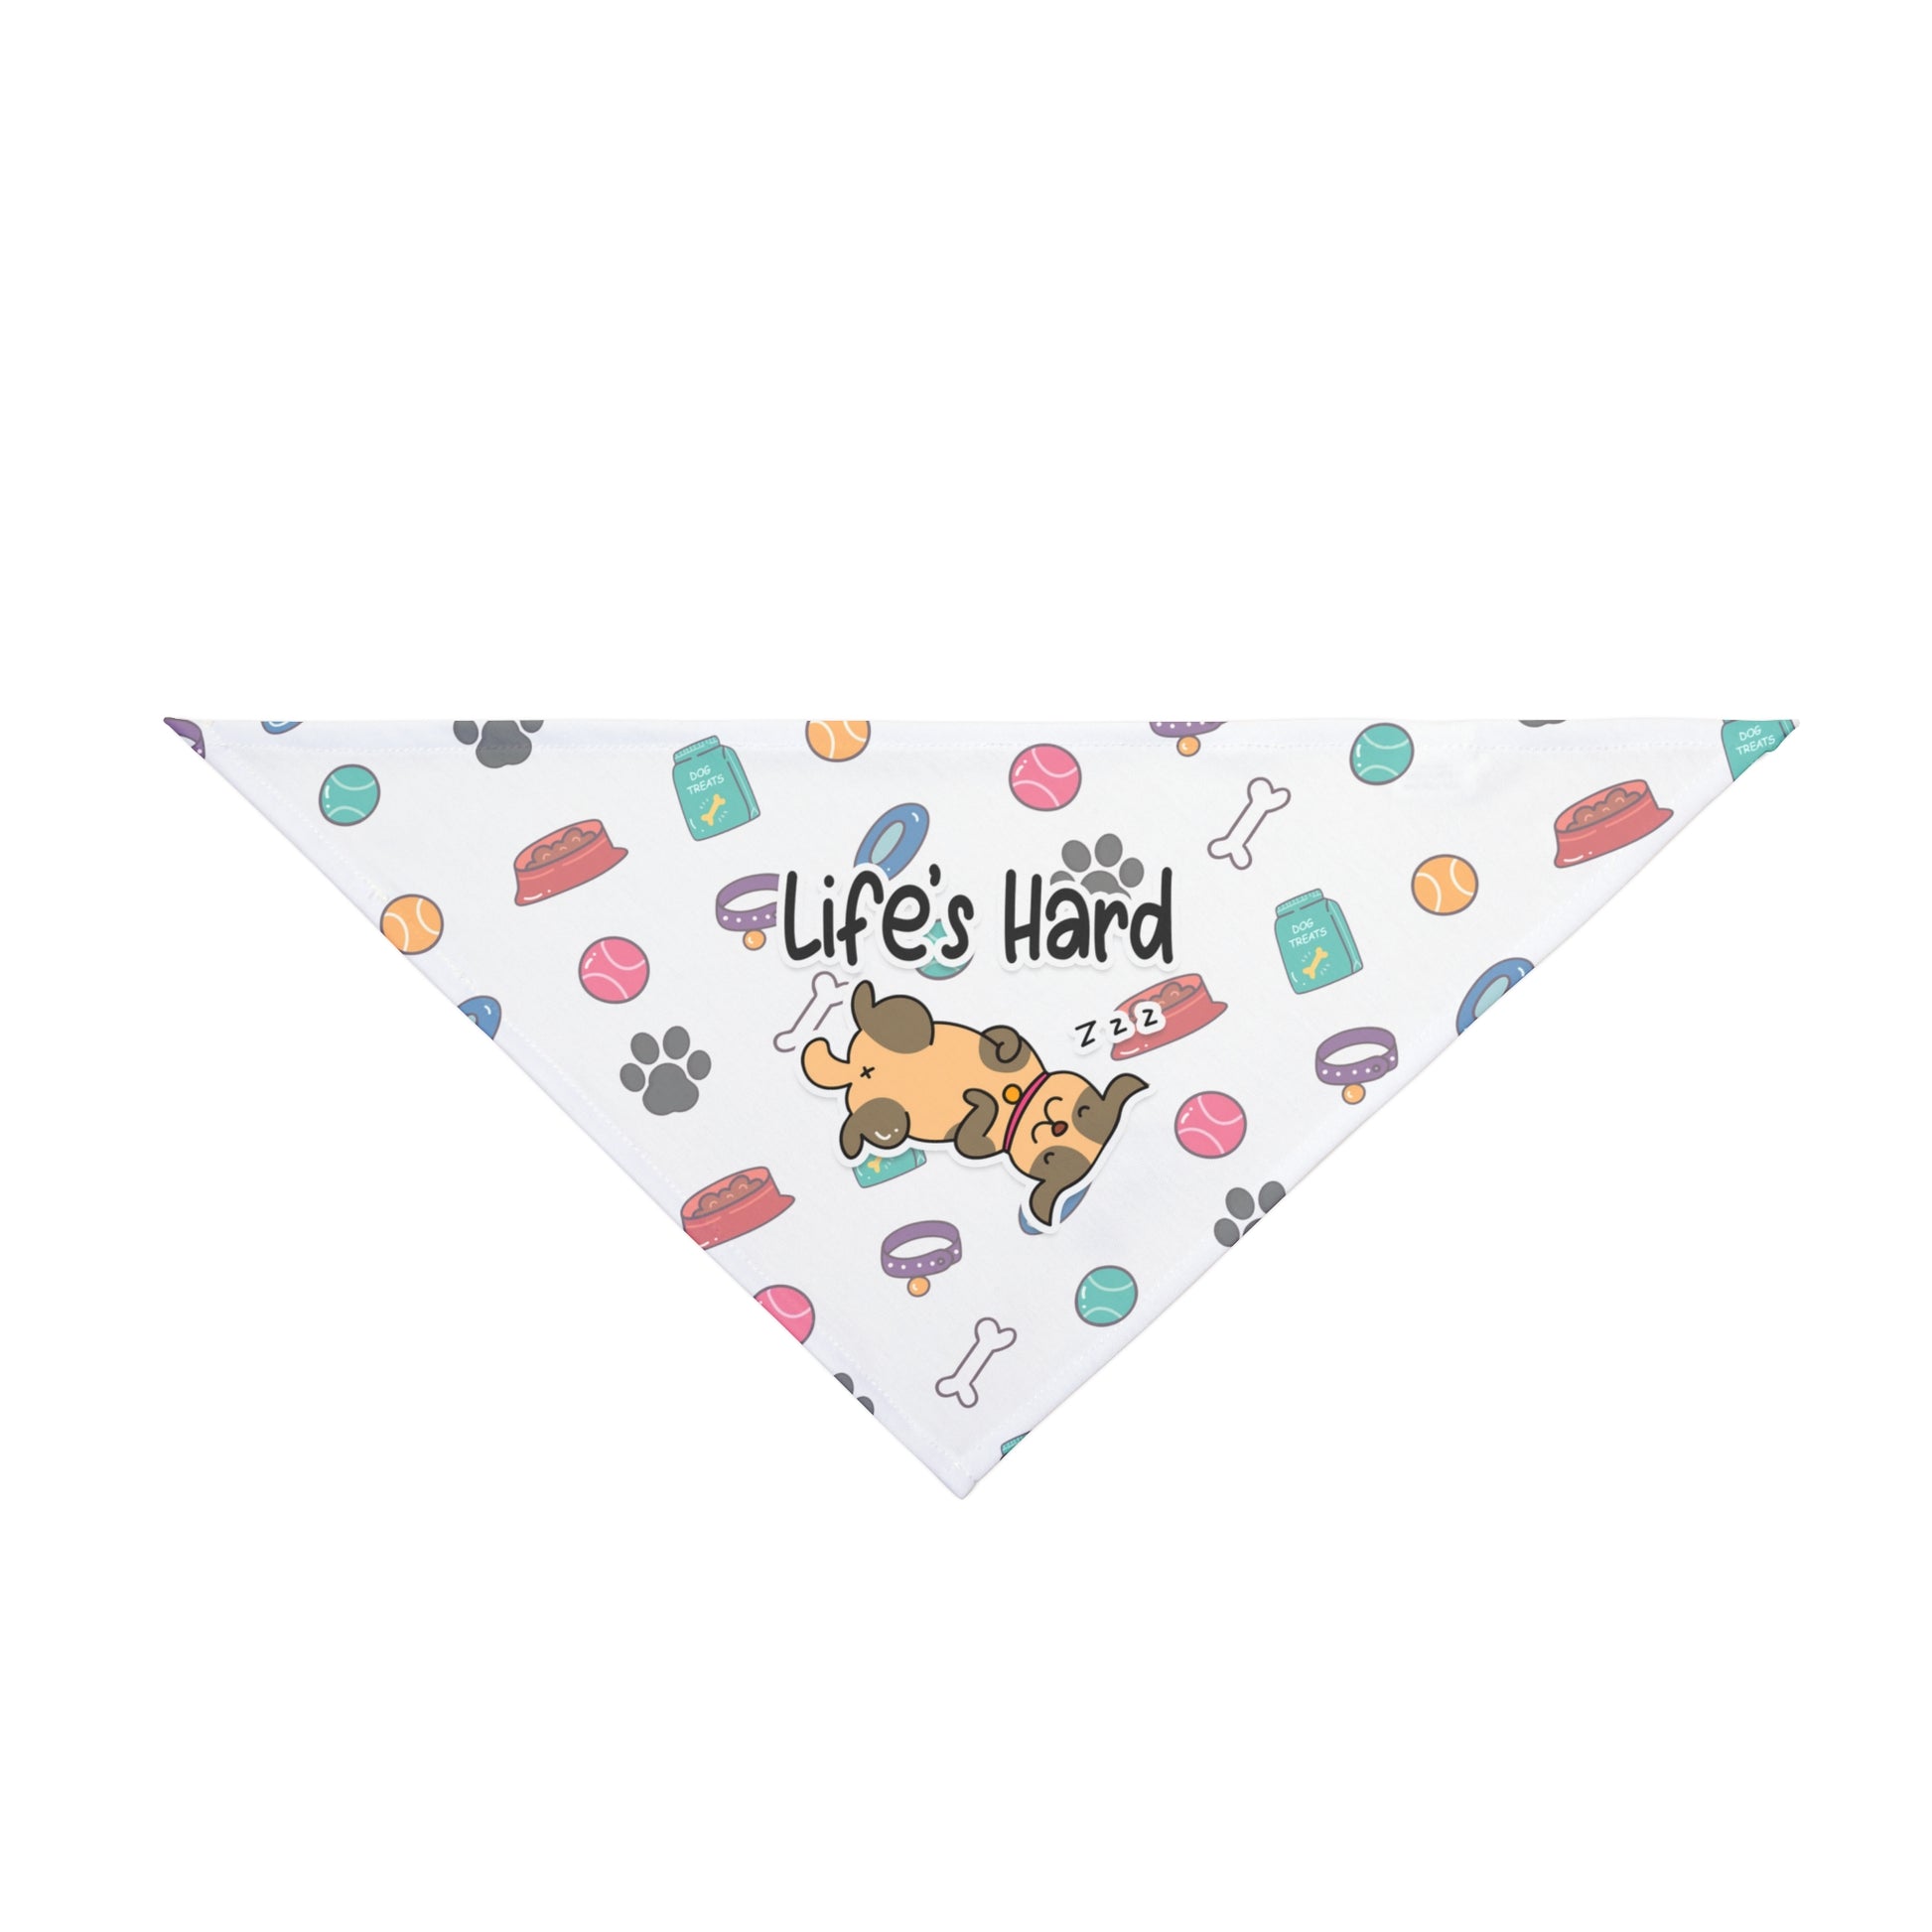 A pet bandana with a beautiful pattern design featuring all things dog love. A smiling dog sleeping below a message that says "Life's hard". Bandana's Color is white